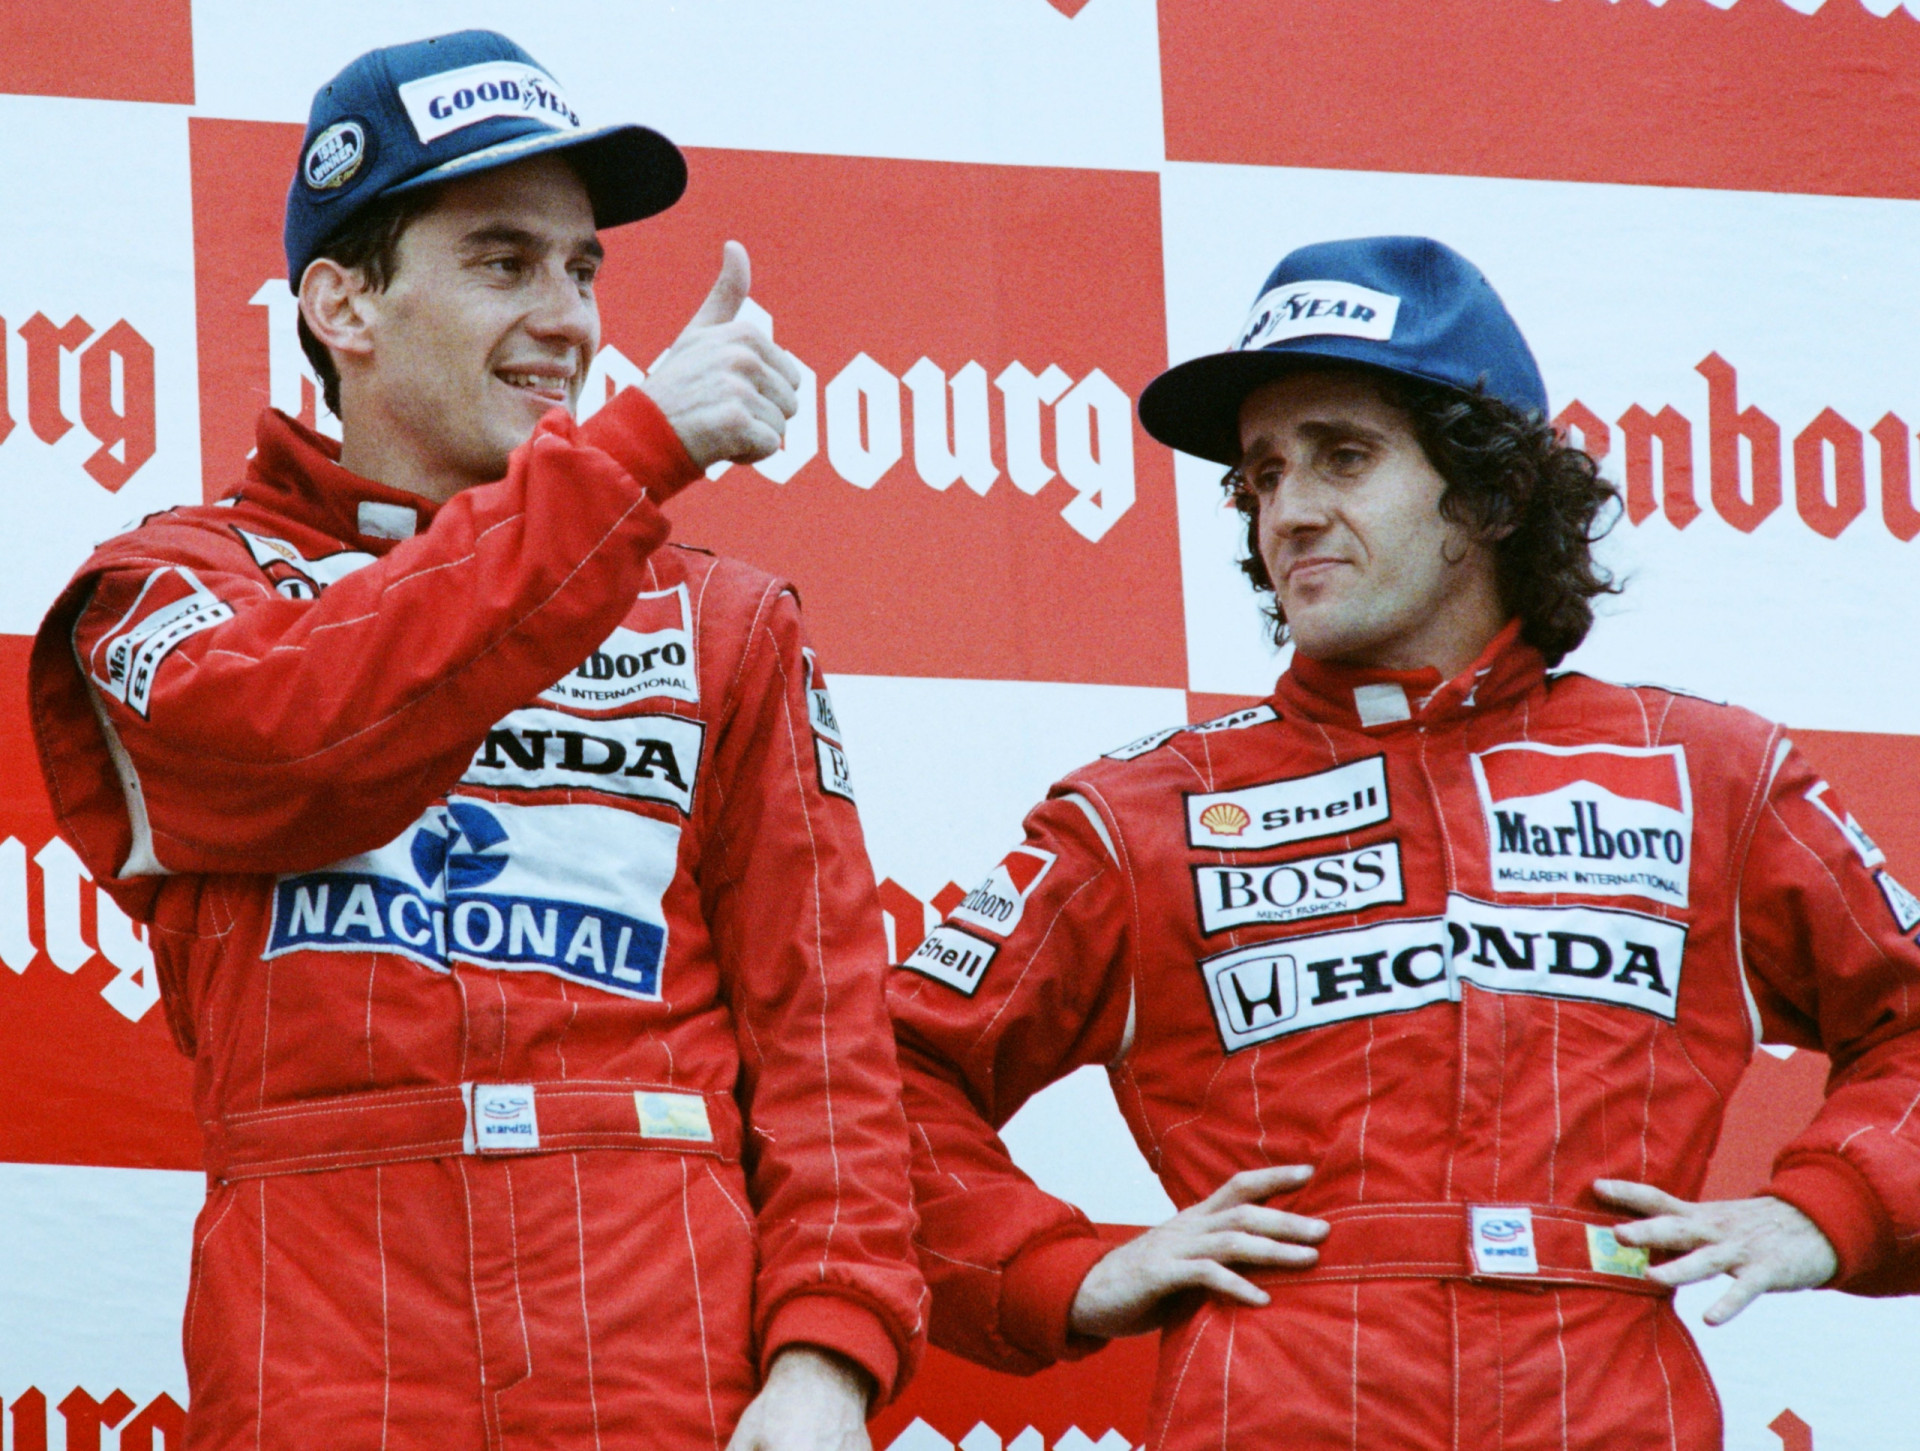 <p>But 1988 would ultimately be remembered for the intense rivalry between Senna and McLaren teammate and already two-time world champion Alain Prost, a personal competition between the two that would endure for the next five years.</p><p><a href="https://www.msn.com/en-us/community/channel/vid-7xx8mnucu55yw63we9va2gwr7uihbxwc68fxqp25x6tg4ftibpra?cvid=94631541bc0f4f89bfd59158d696ad7e">Follow us and access great exclusive content every day</a></p>